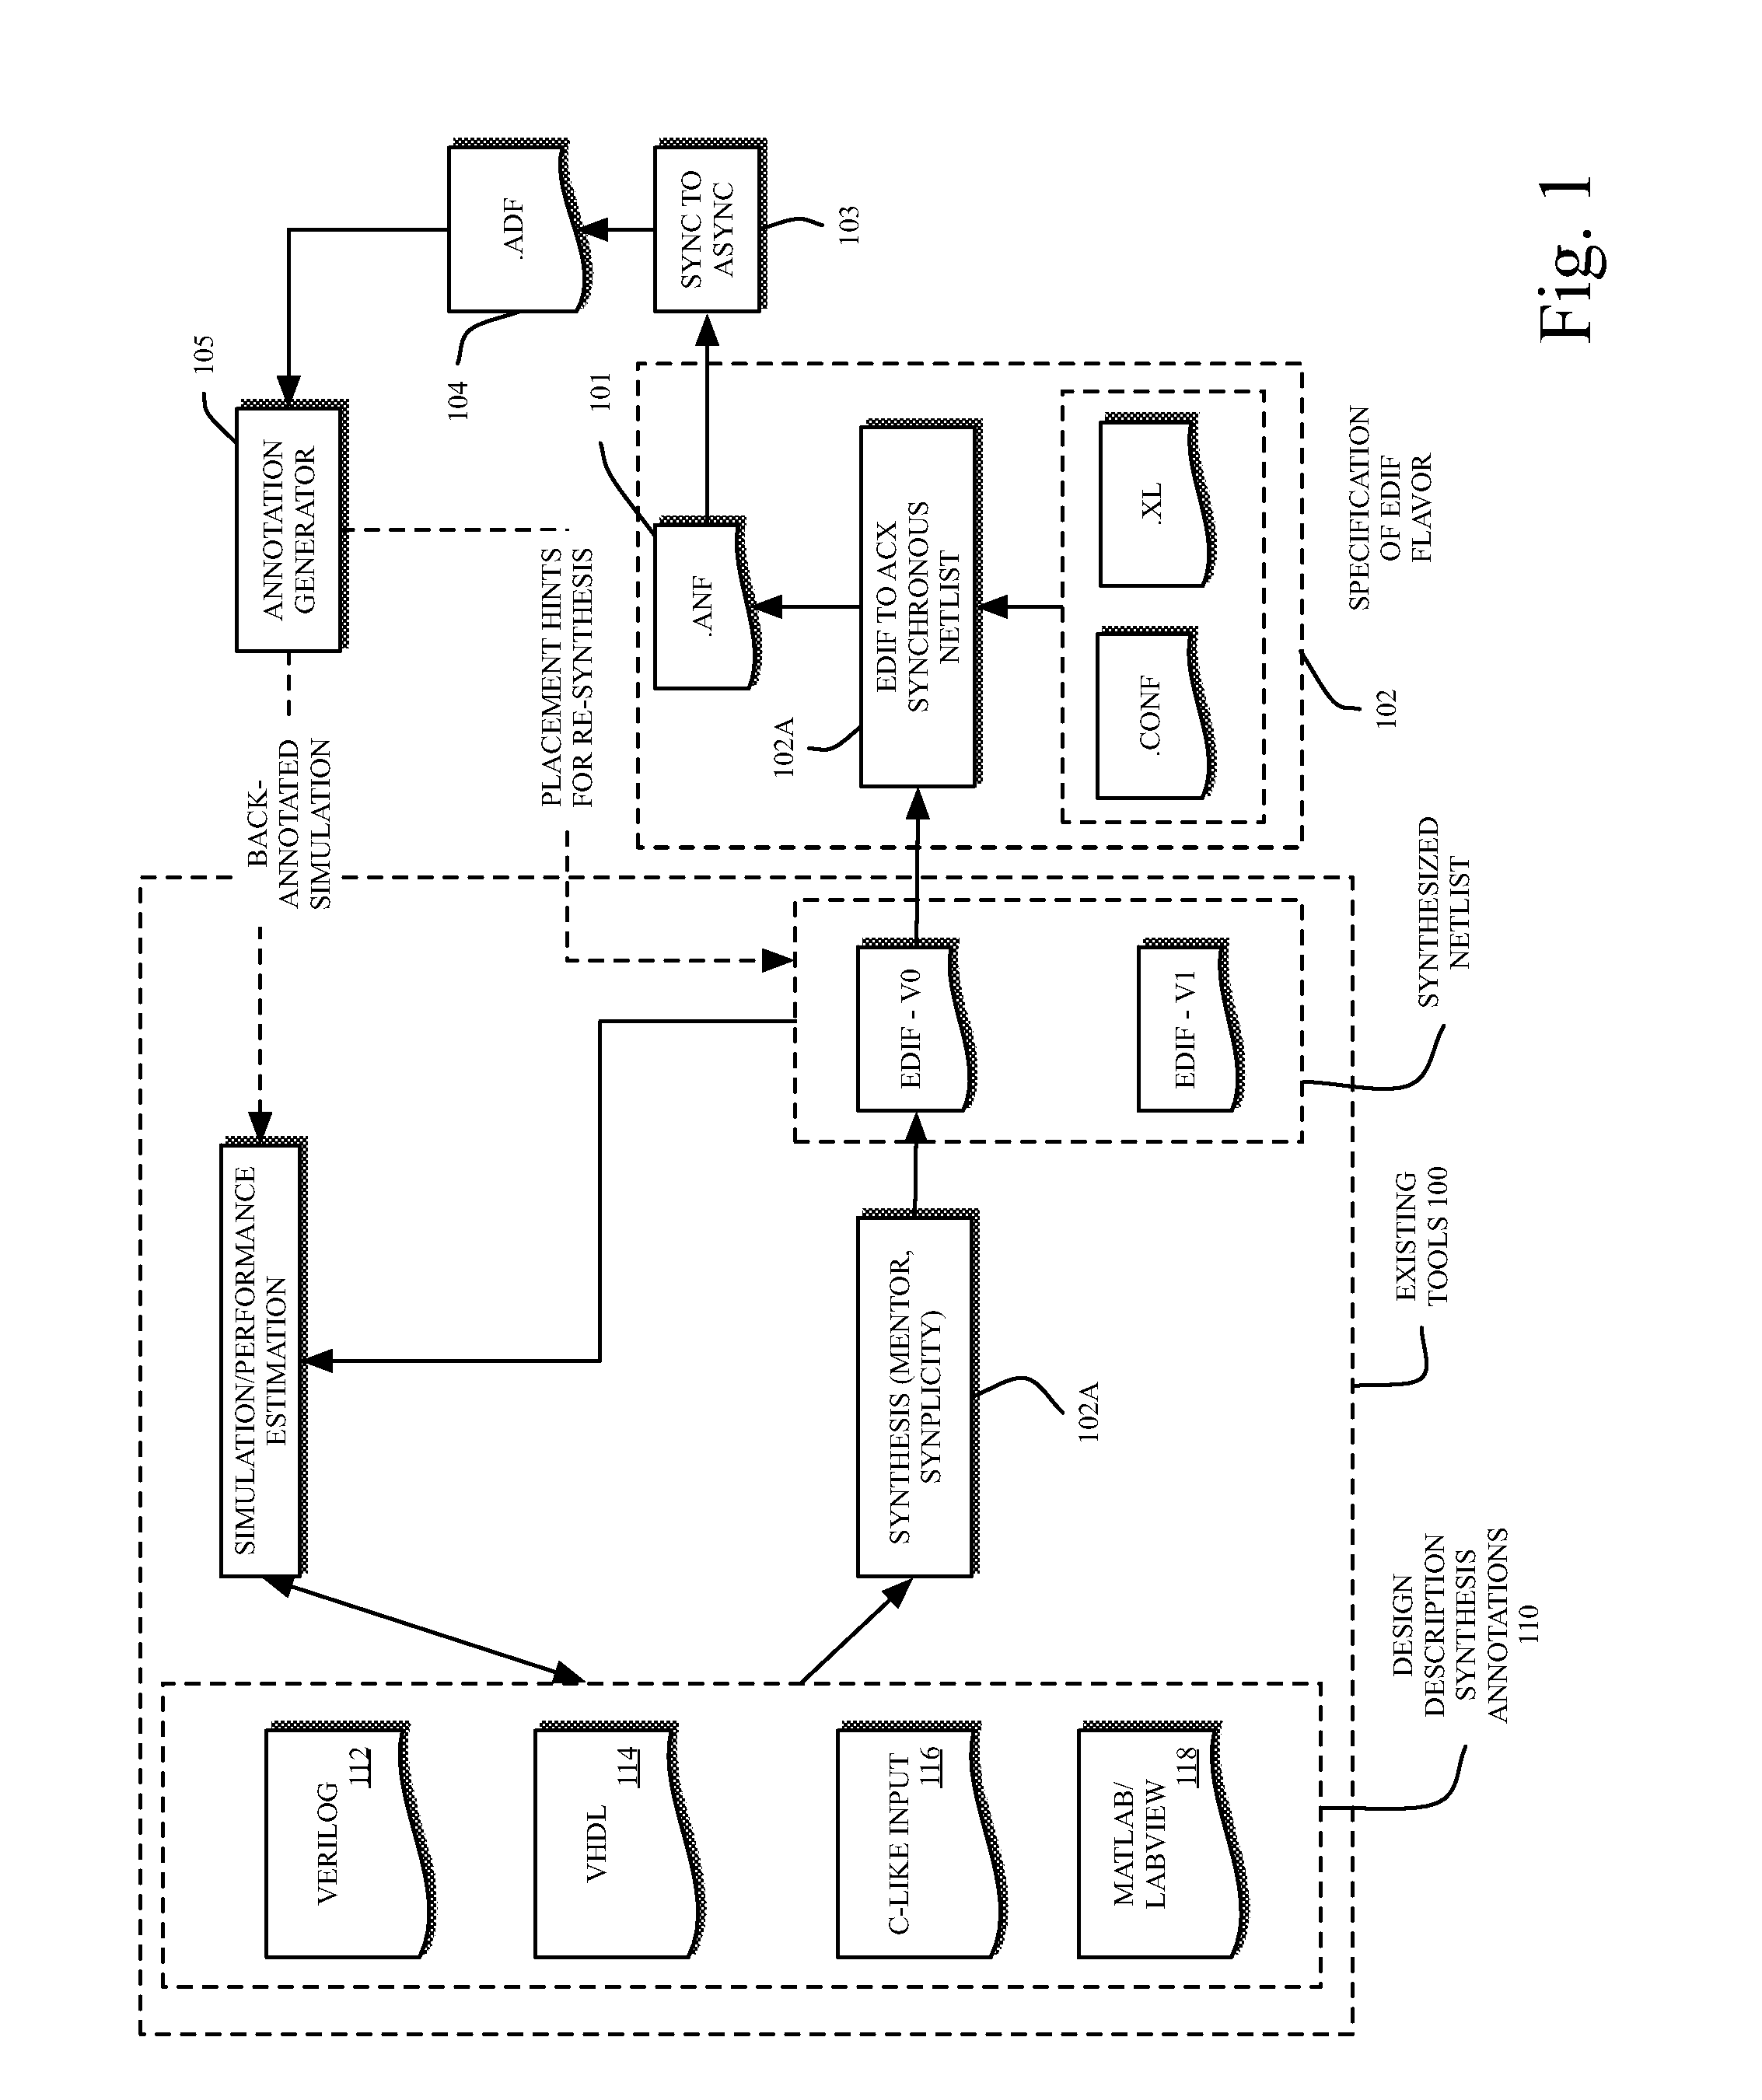 Systems and methods for performing automated conversion of representations of synchronous circuit designs to and from representations of asynchronous circuit designs